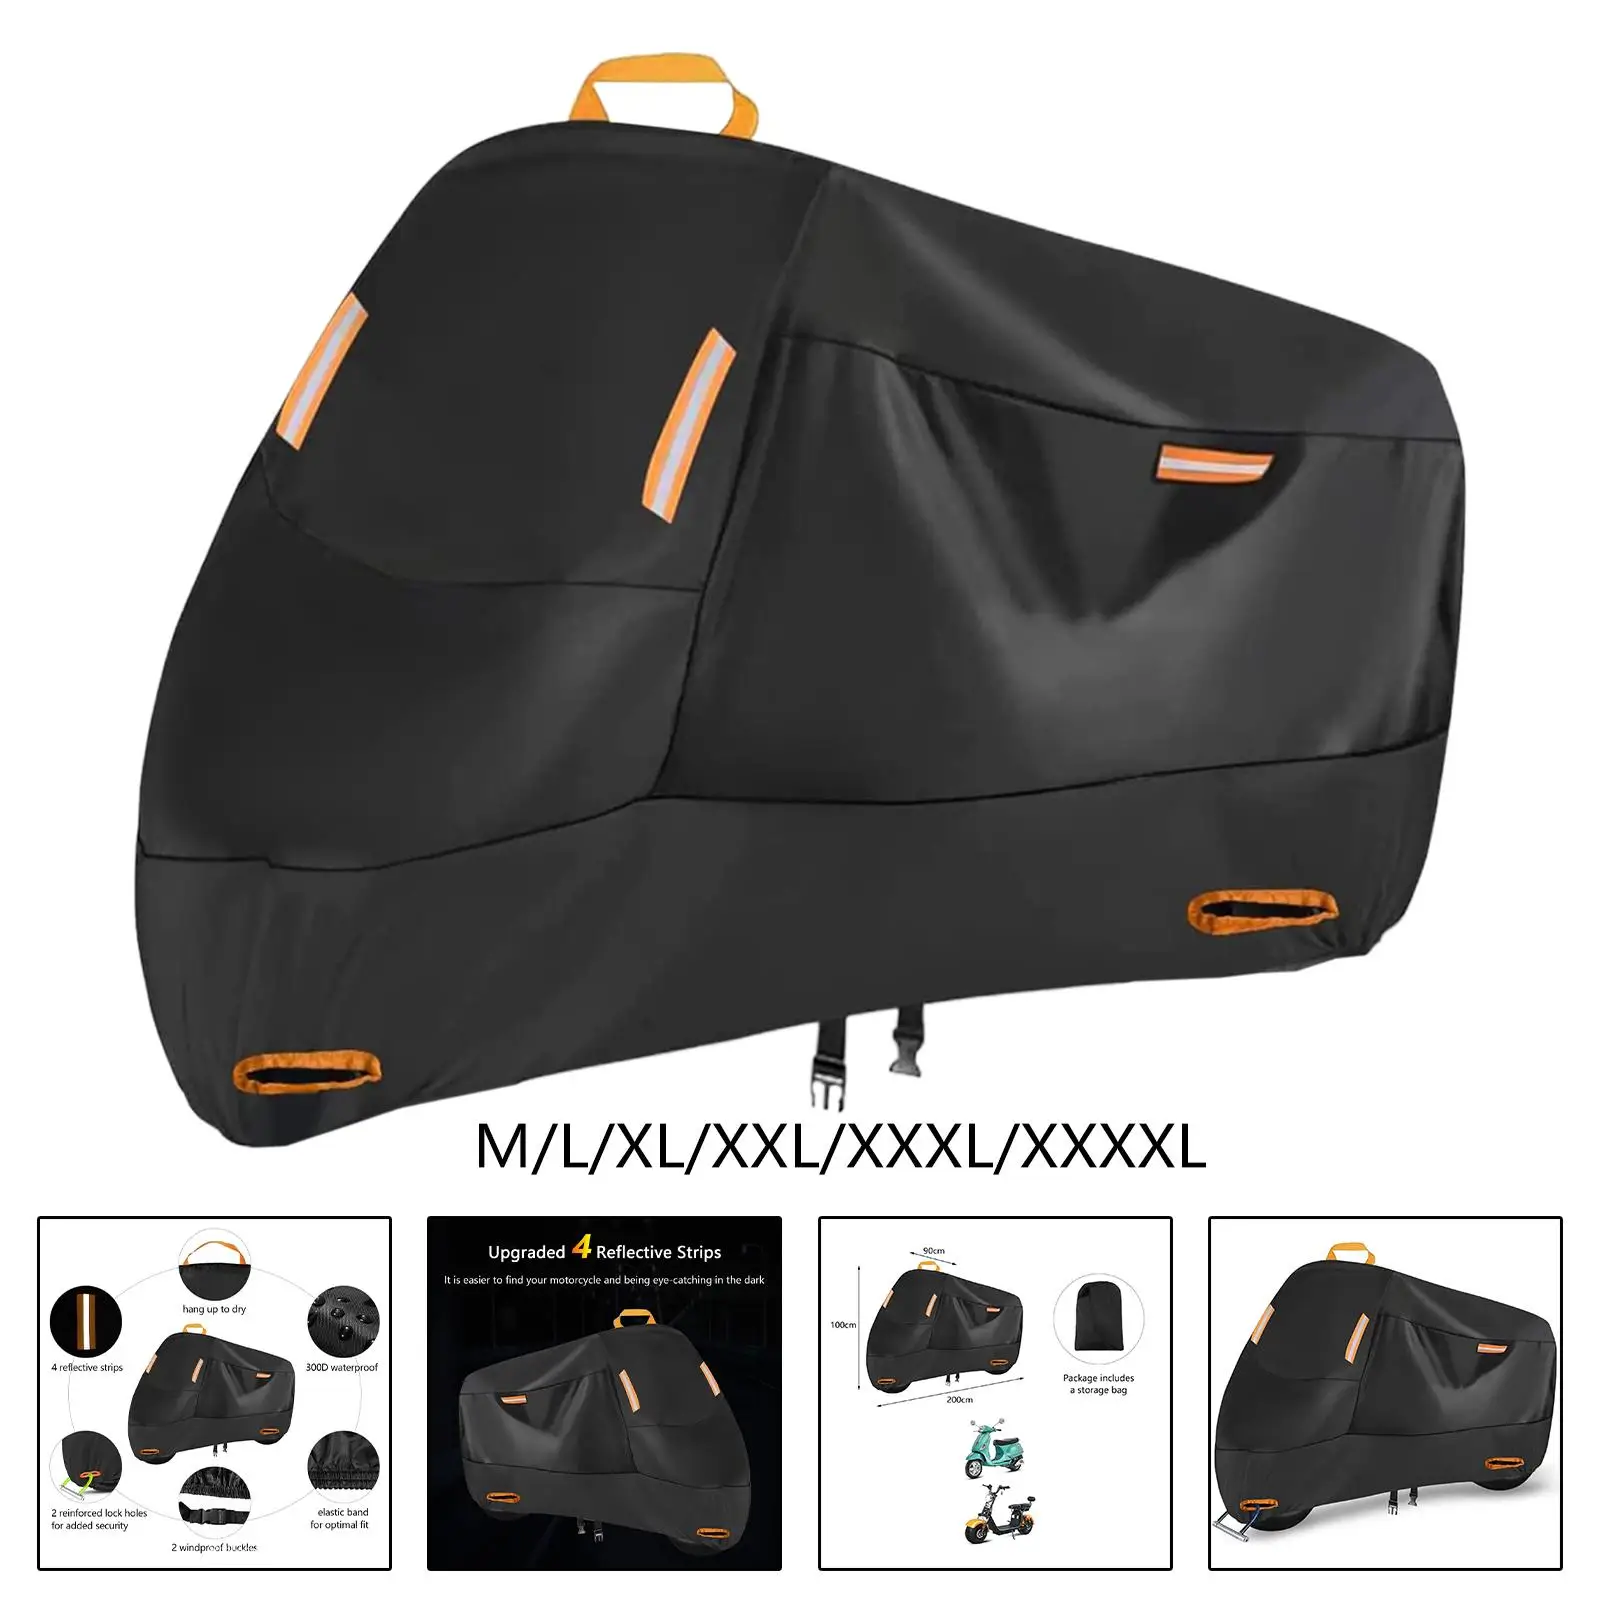 Motorcycle Cover, Cover, Protective, 2 Windproof Buckles, Universal Motocross Rain Cover ,Motorbike Cover for Bike